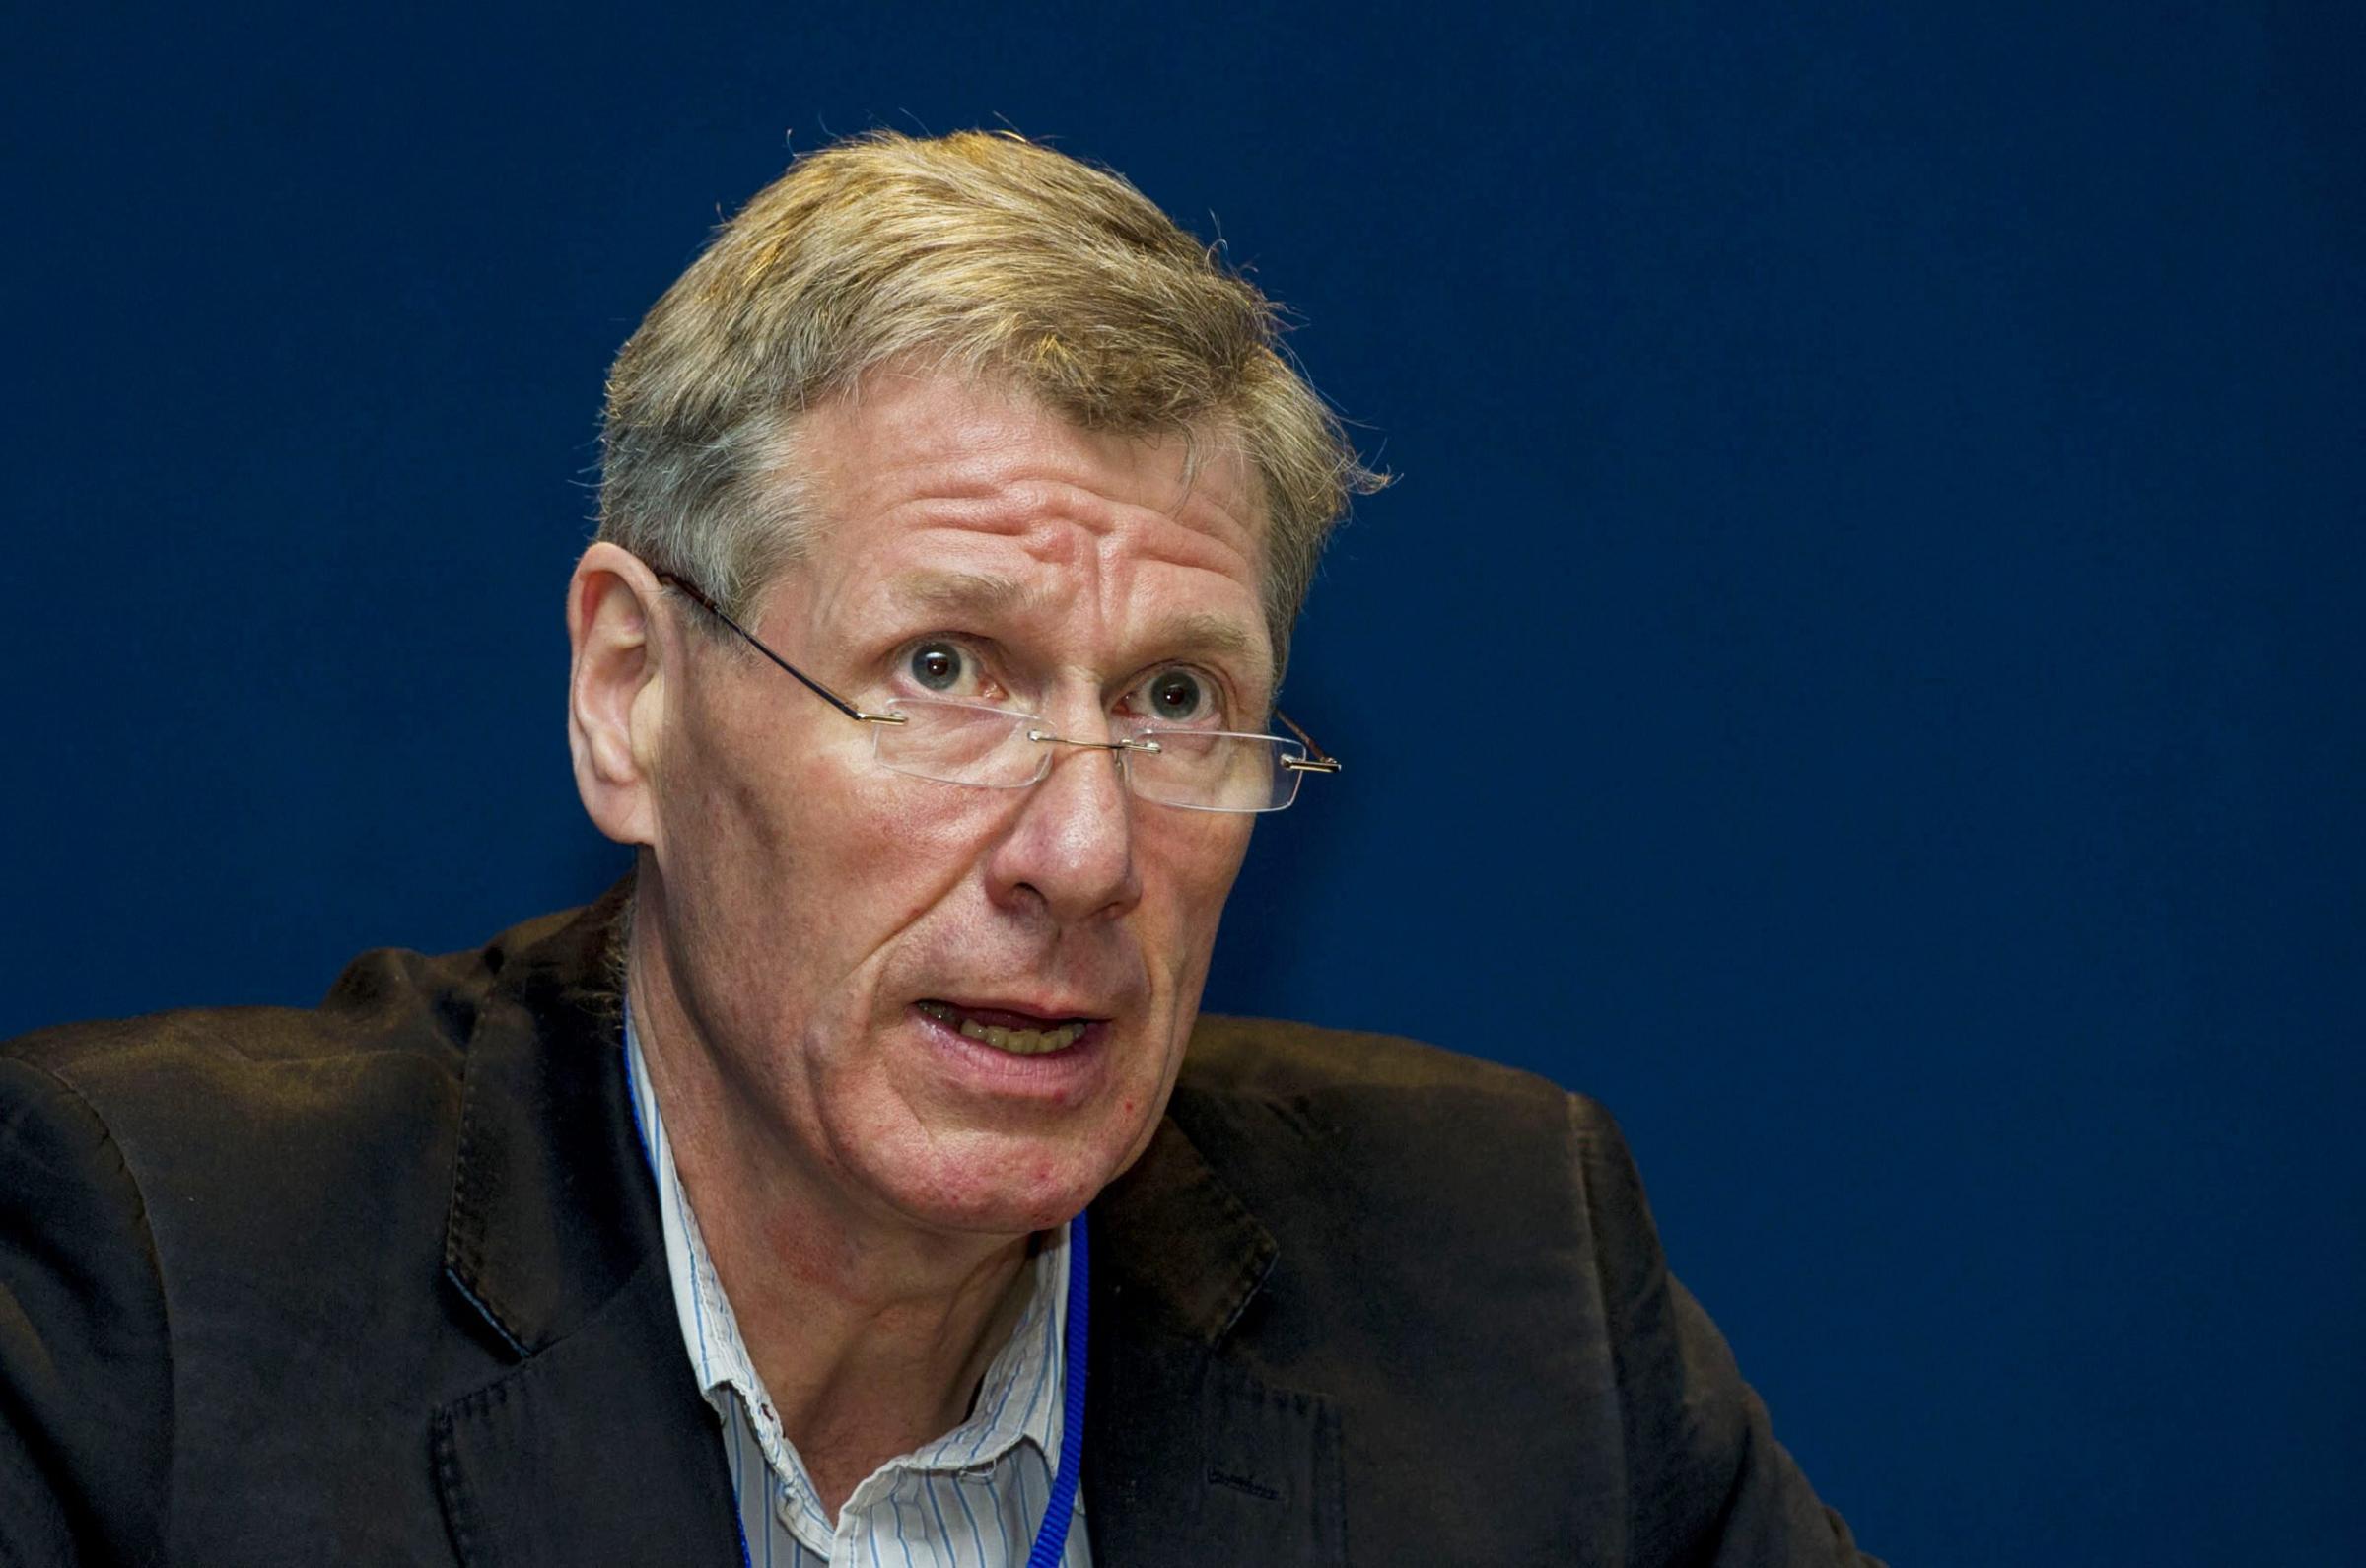 Kenny MacAskill has called for “home rule” as an alternative to the present indyref deadlock